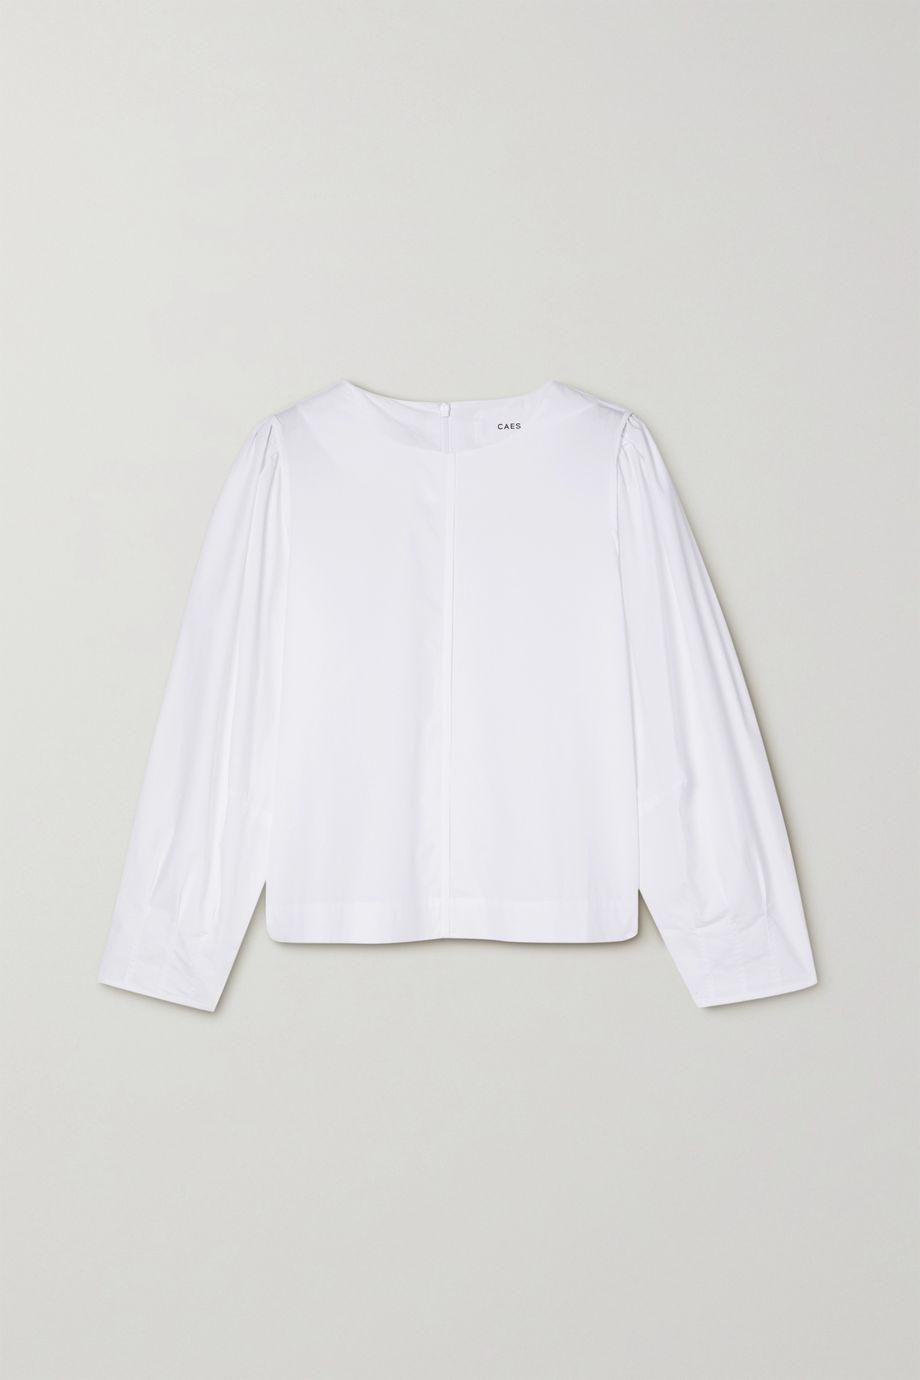 Lyocell and cotton-blend poplin blouse by CAES